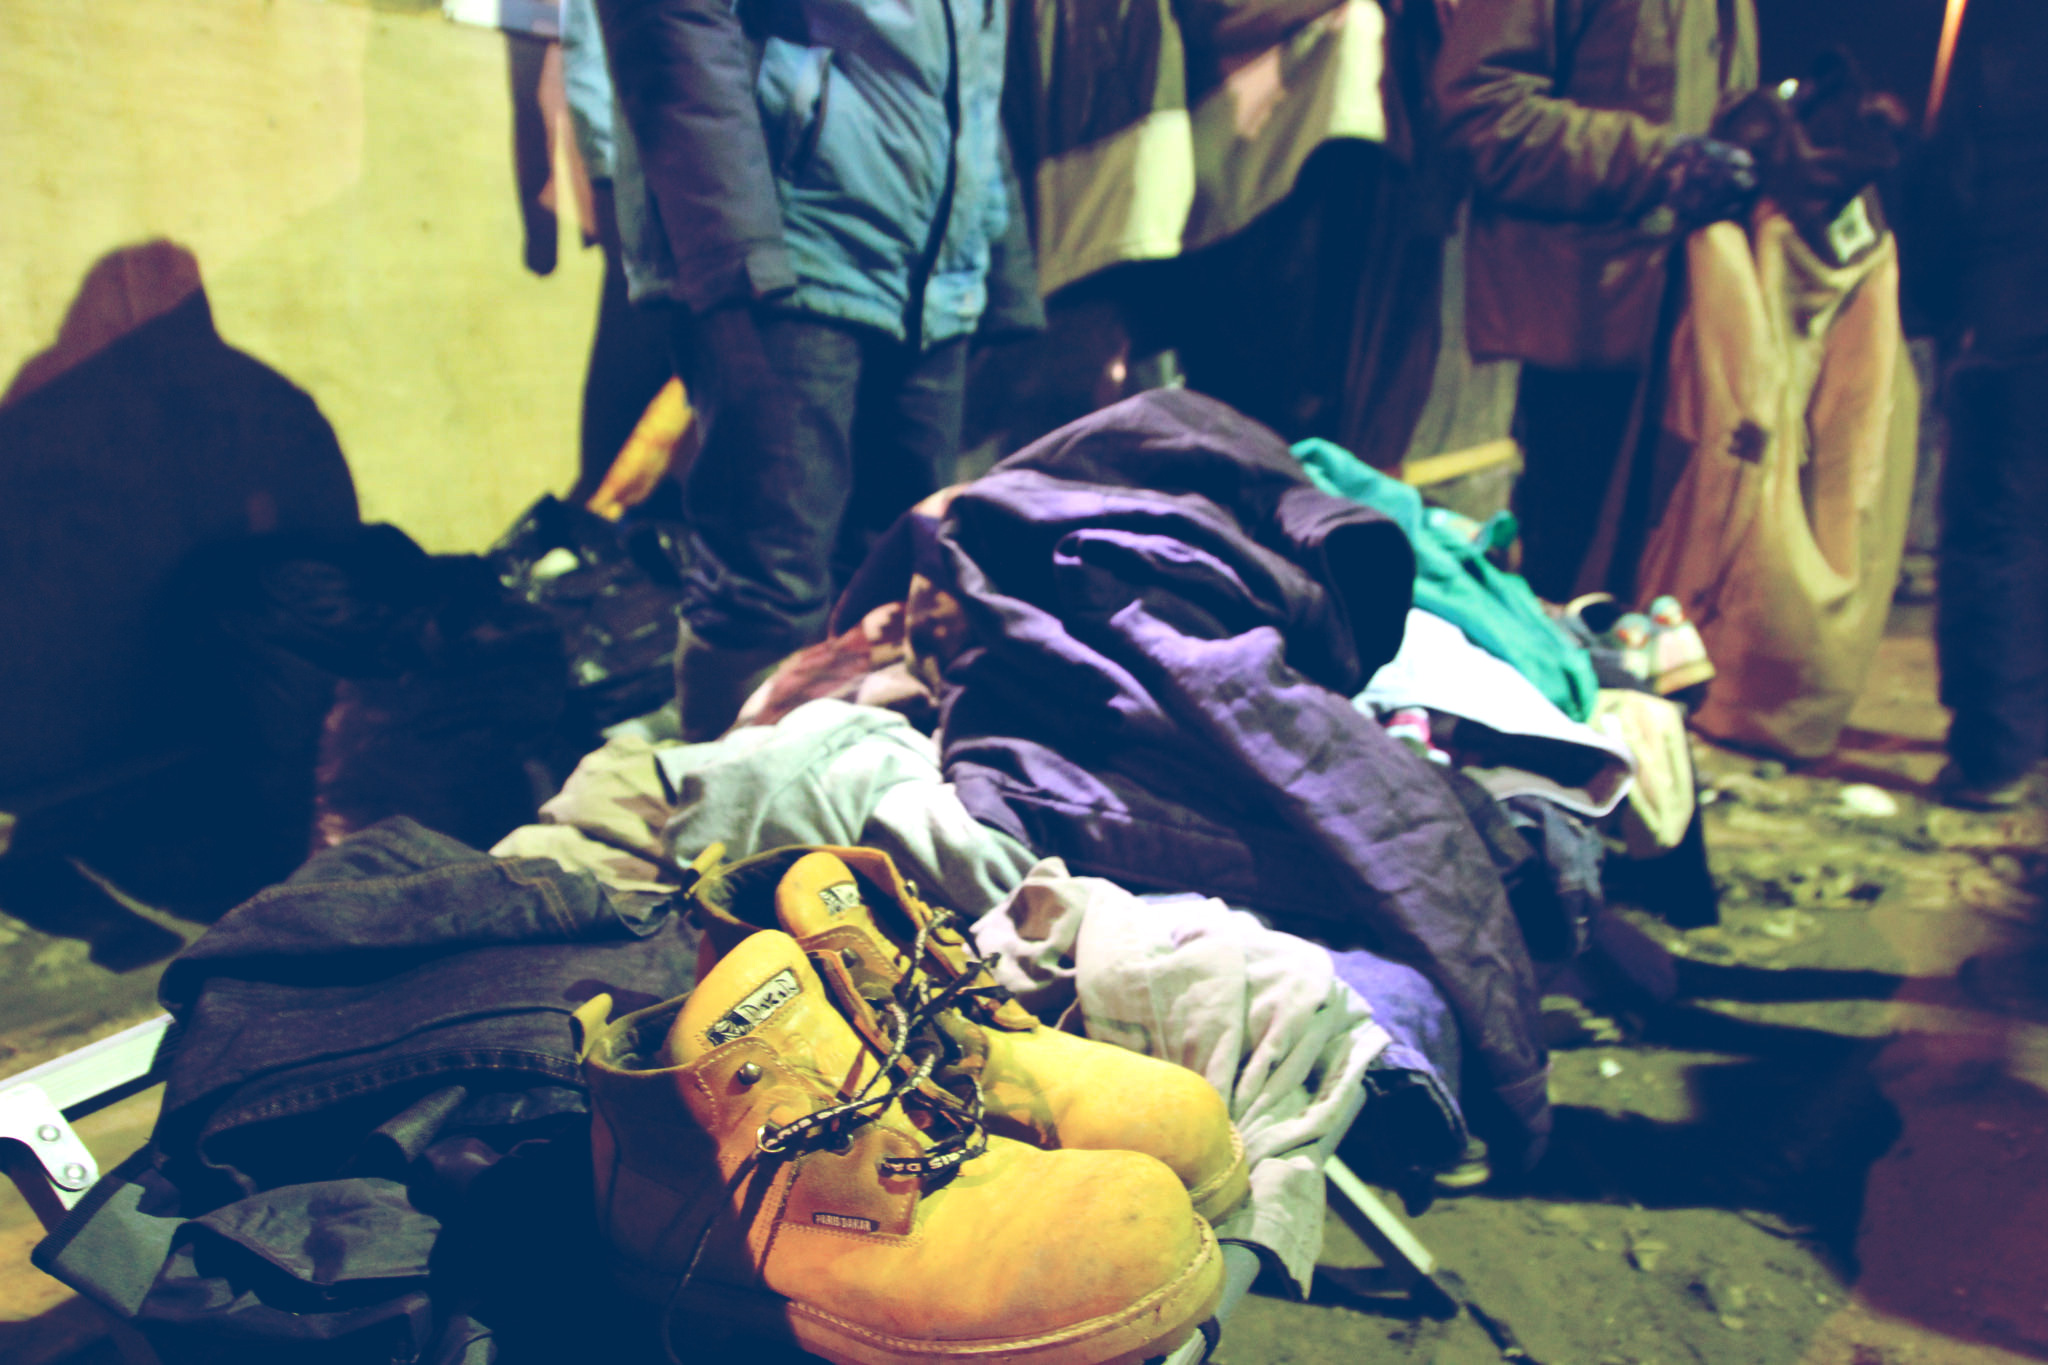 Shoes, jackets, and clothing stacked up in a pile on the ground